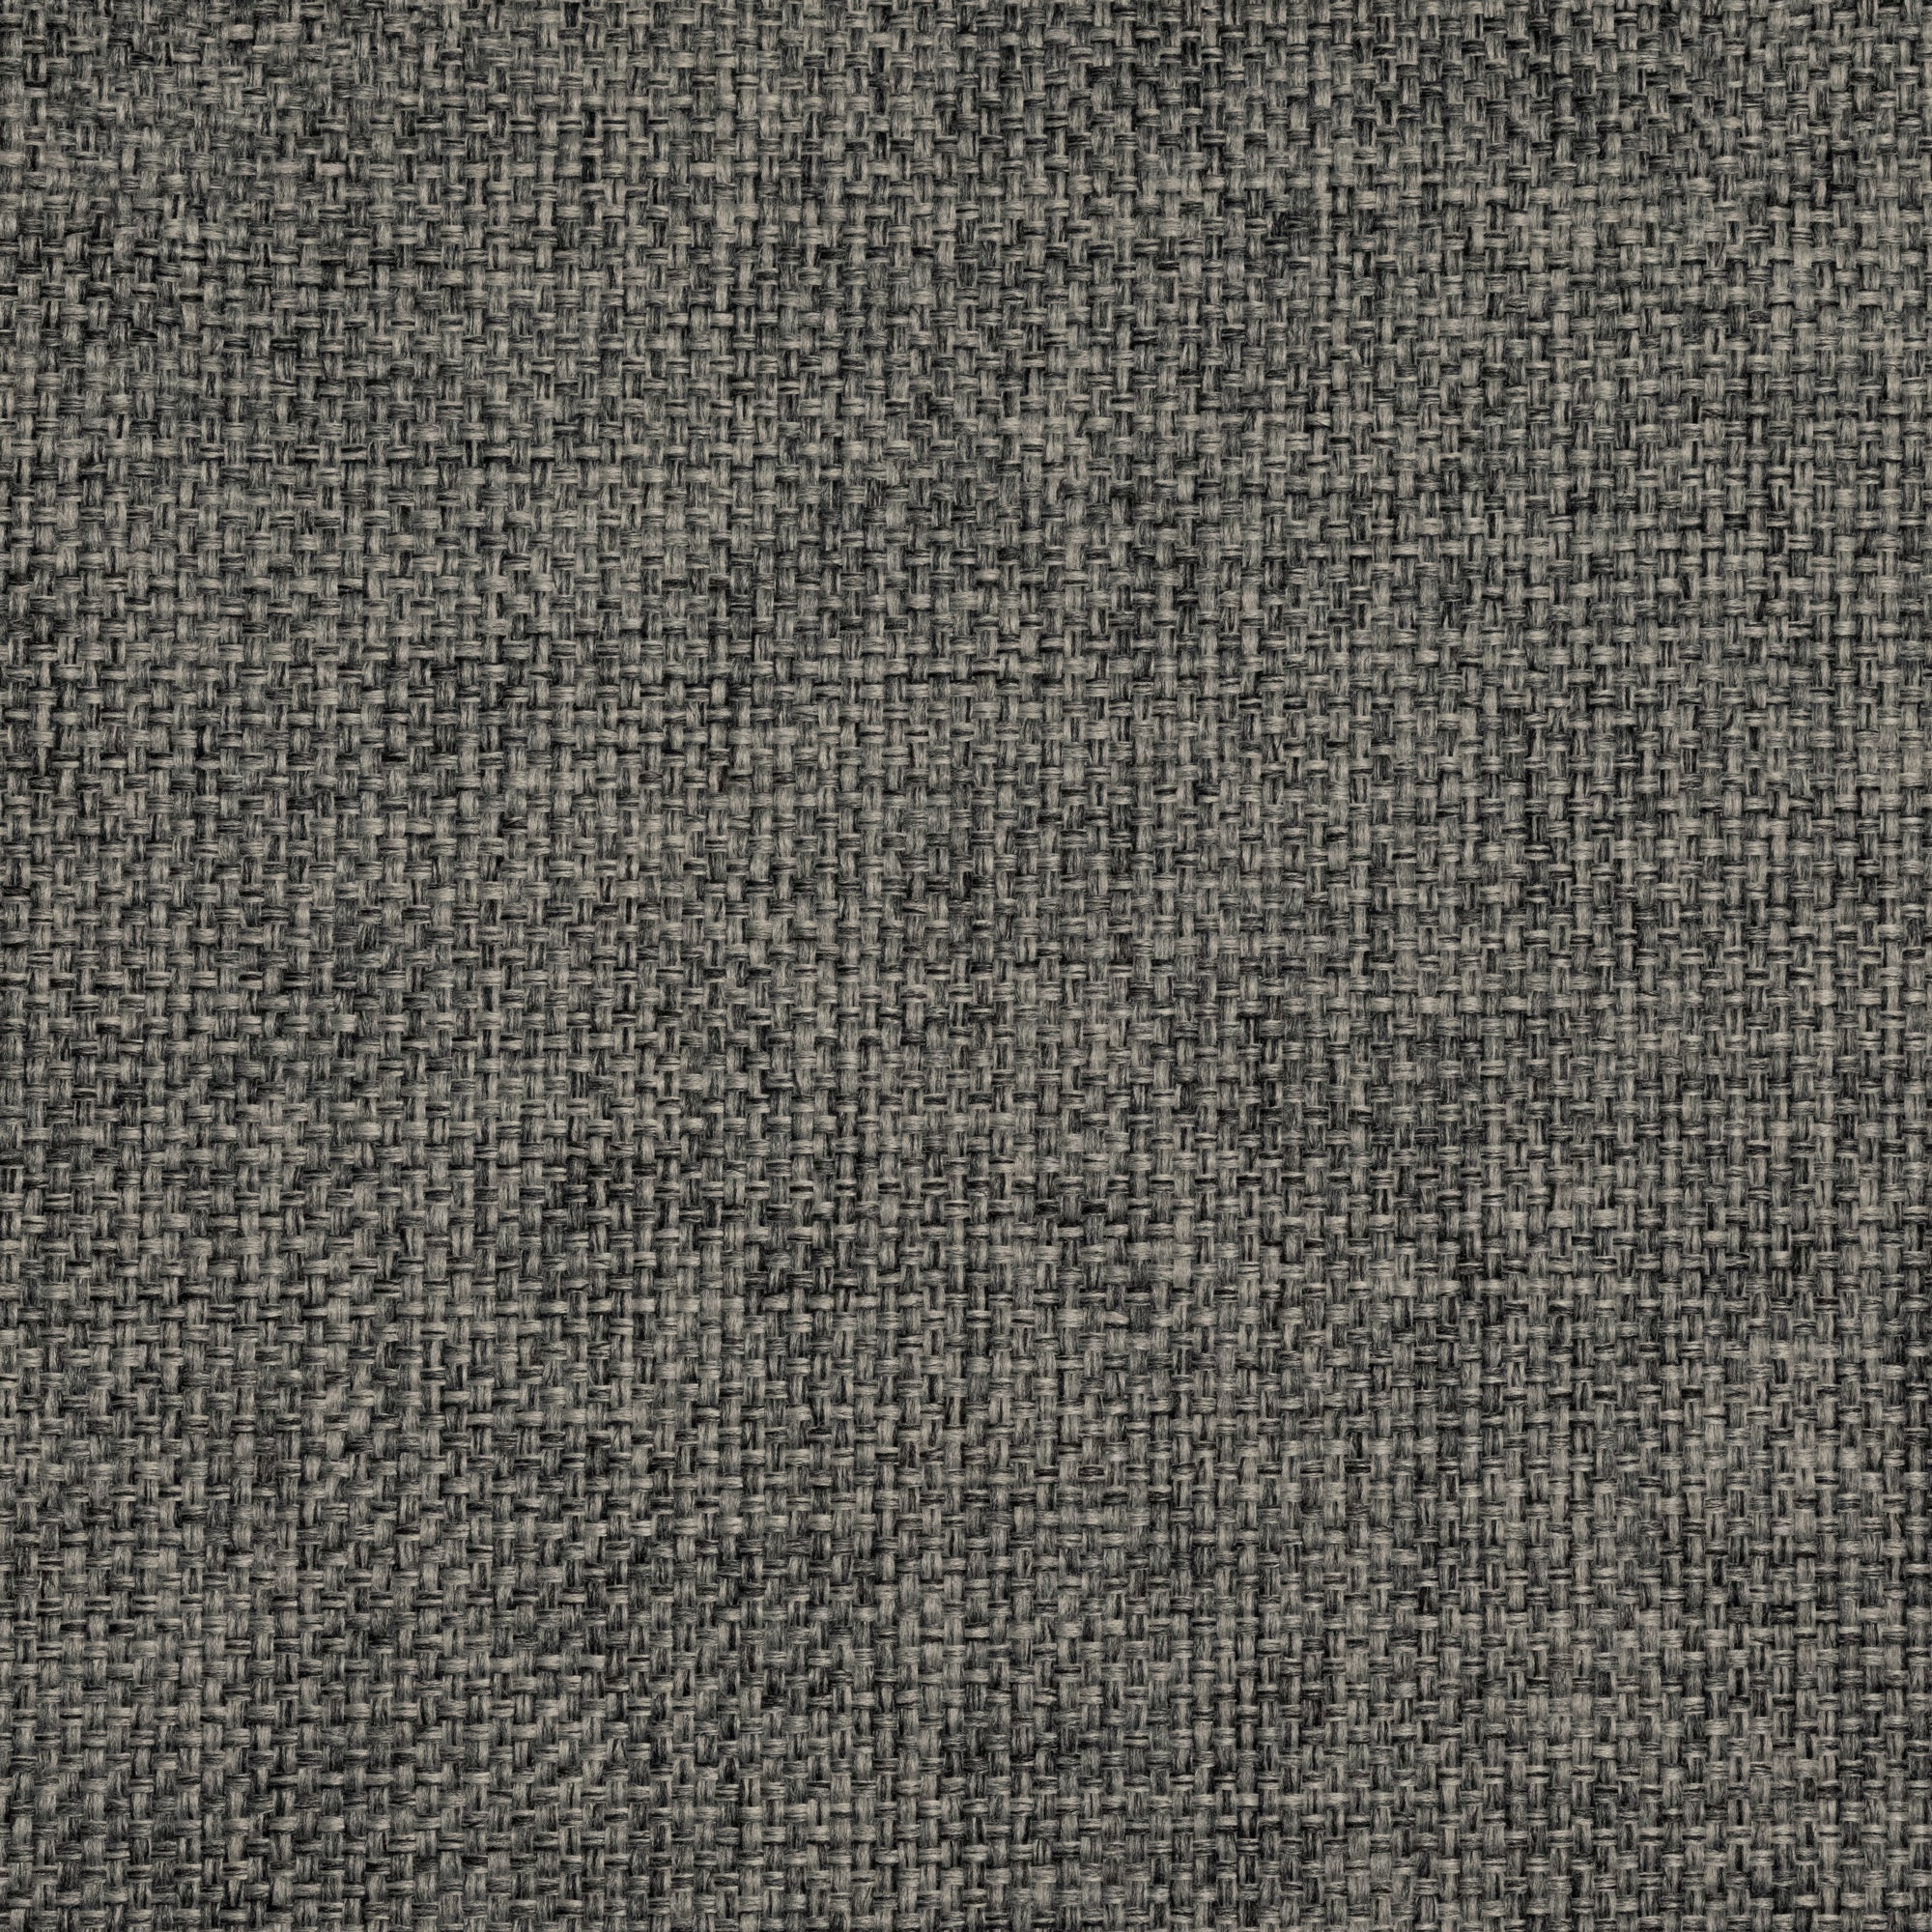 Black Plain Solid Tweed Textures Upholstery Fabric by The Yard